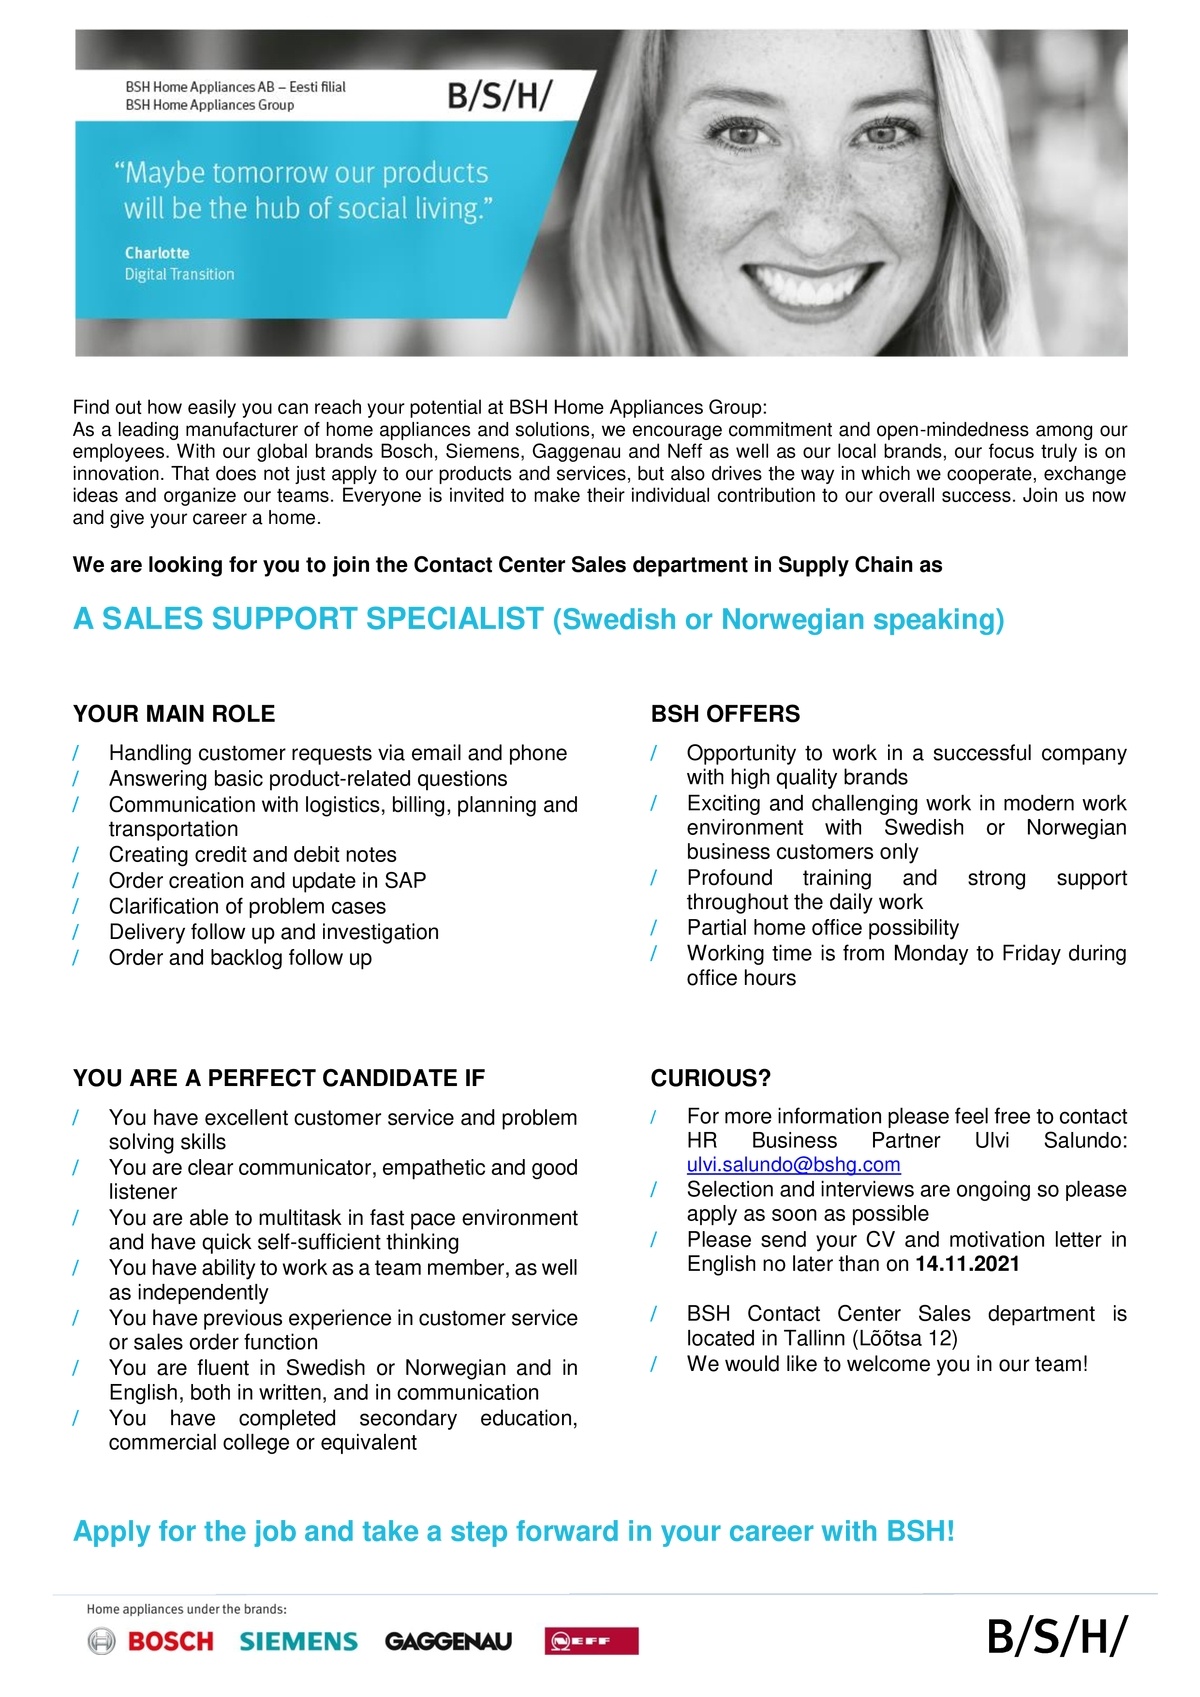 BSH HOME APPLIANCES AB EESTI FILIAAL A Sales Support Specialist /Swedish or Norwegian speaking